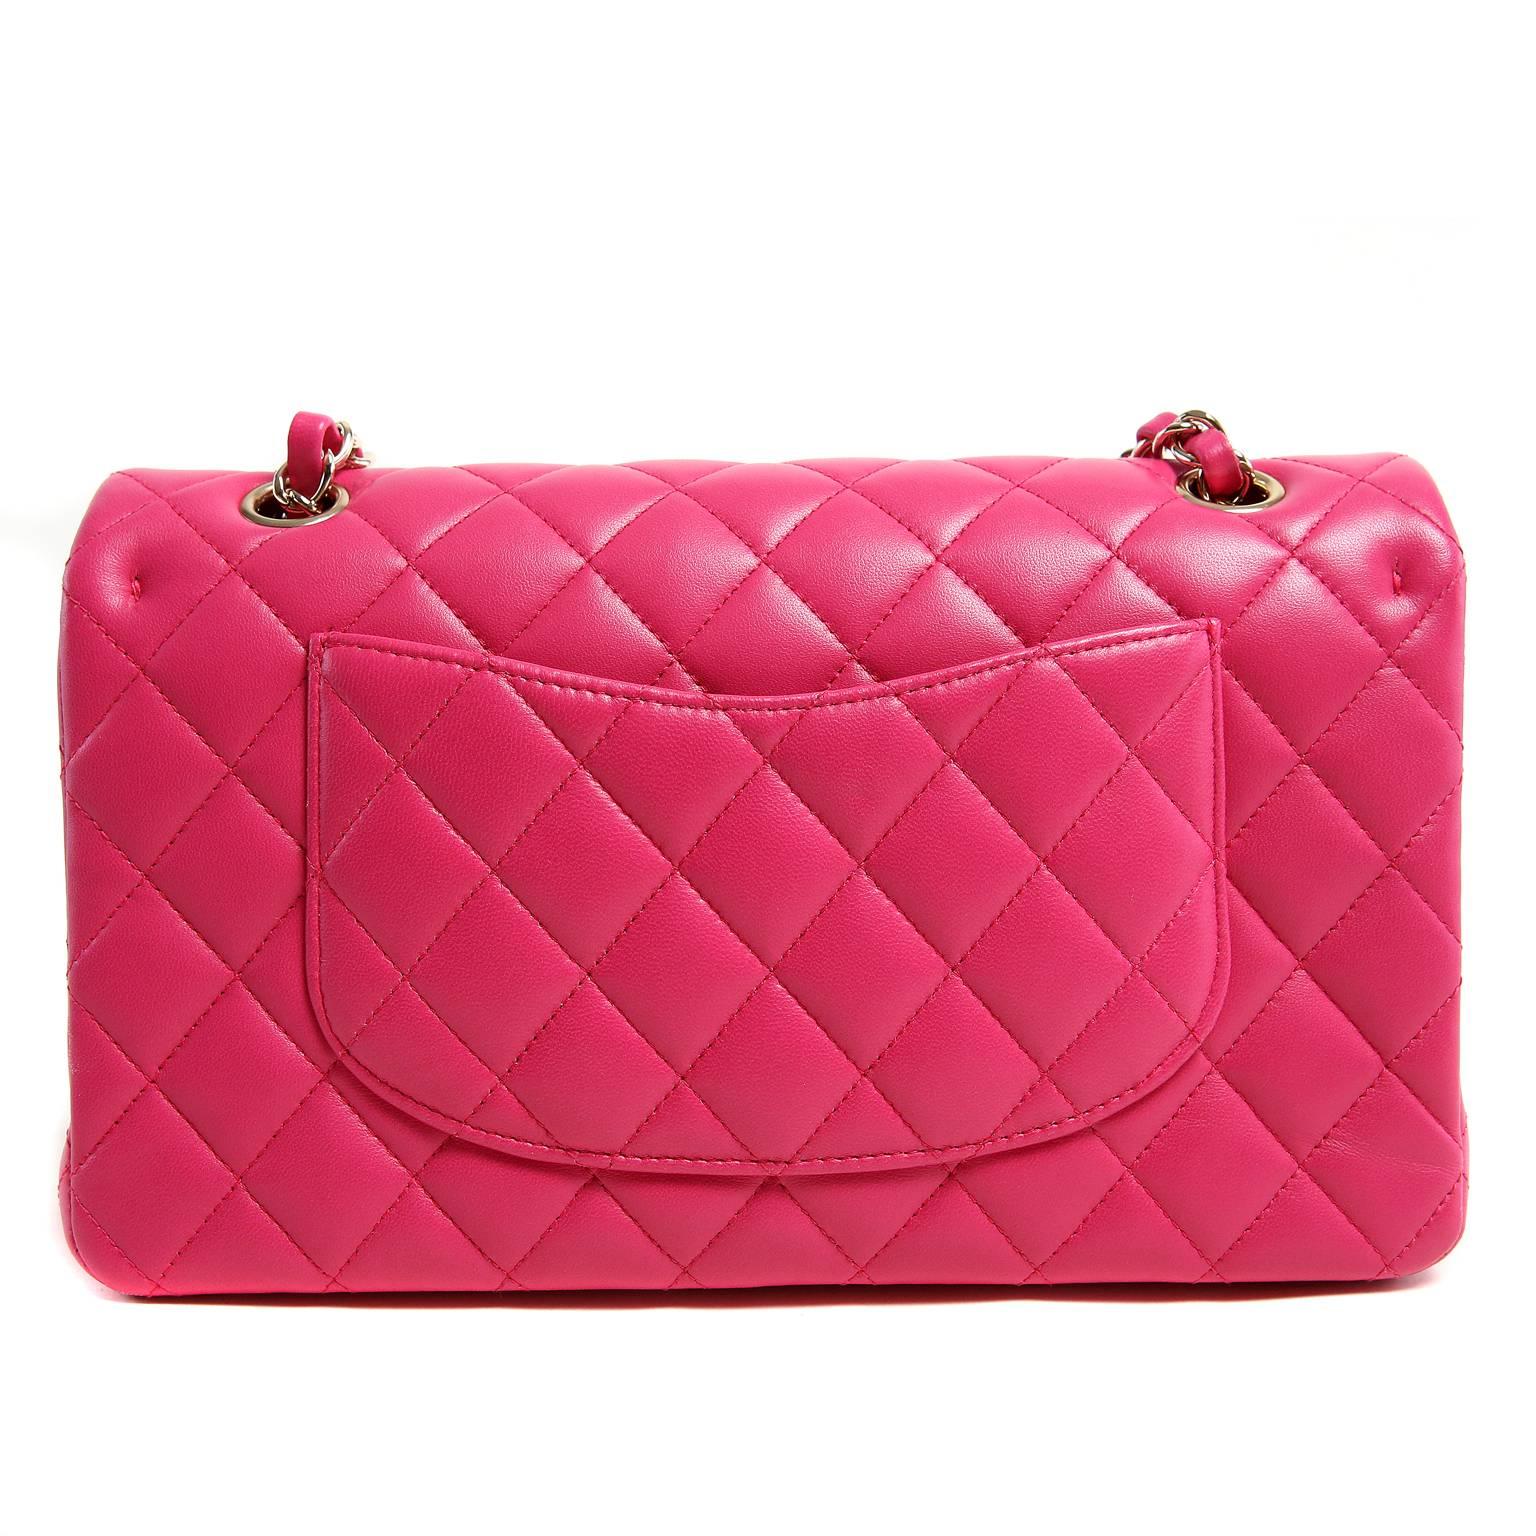 Chanel Fuchsia Leather Double Flap Classic- PRISTINE 
  Perfectly proportioned in the medium silhouette, this eye-catching classic adds a brilliant pop of color to any wardrobe. 
 
Vivid fuchsia leather is quilted in signature Chanel diamond